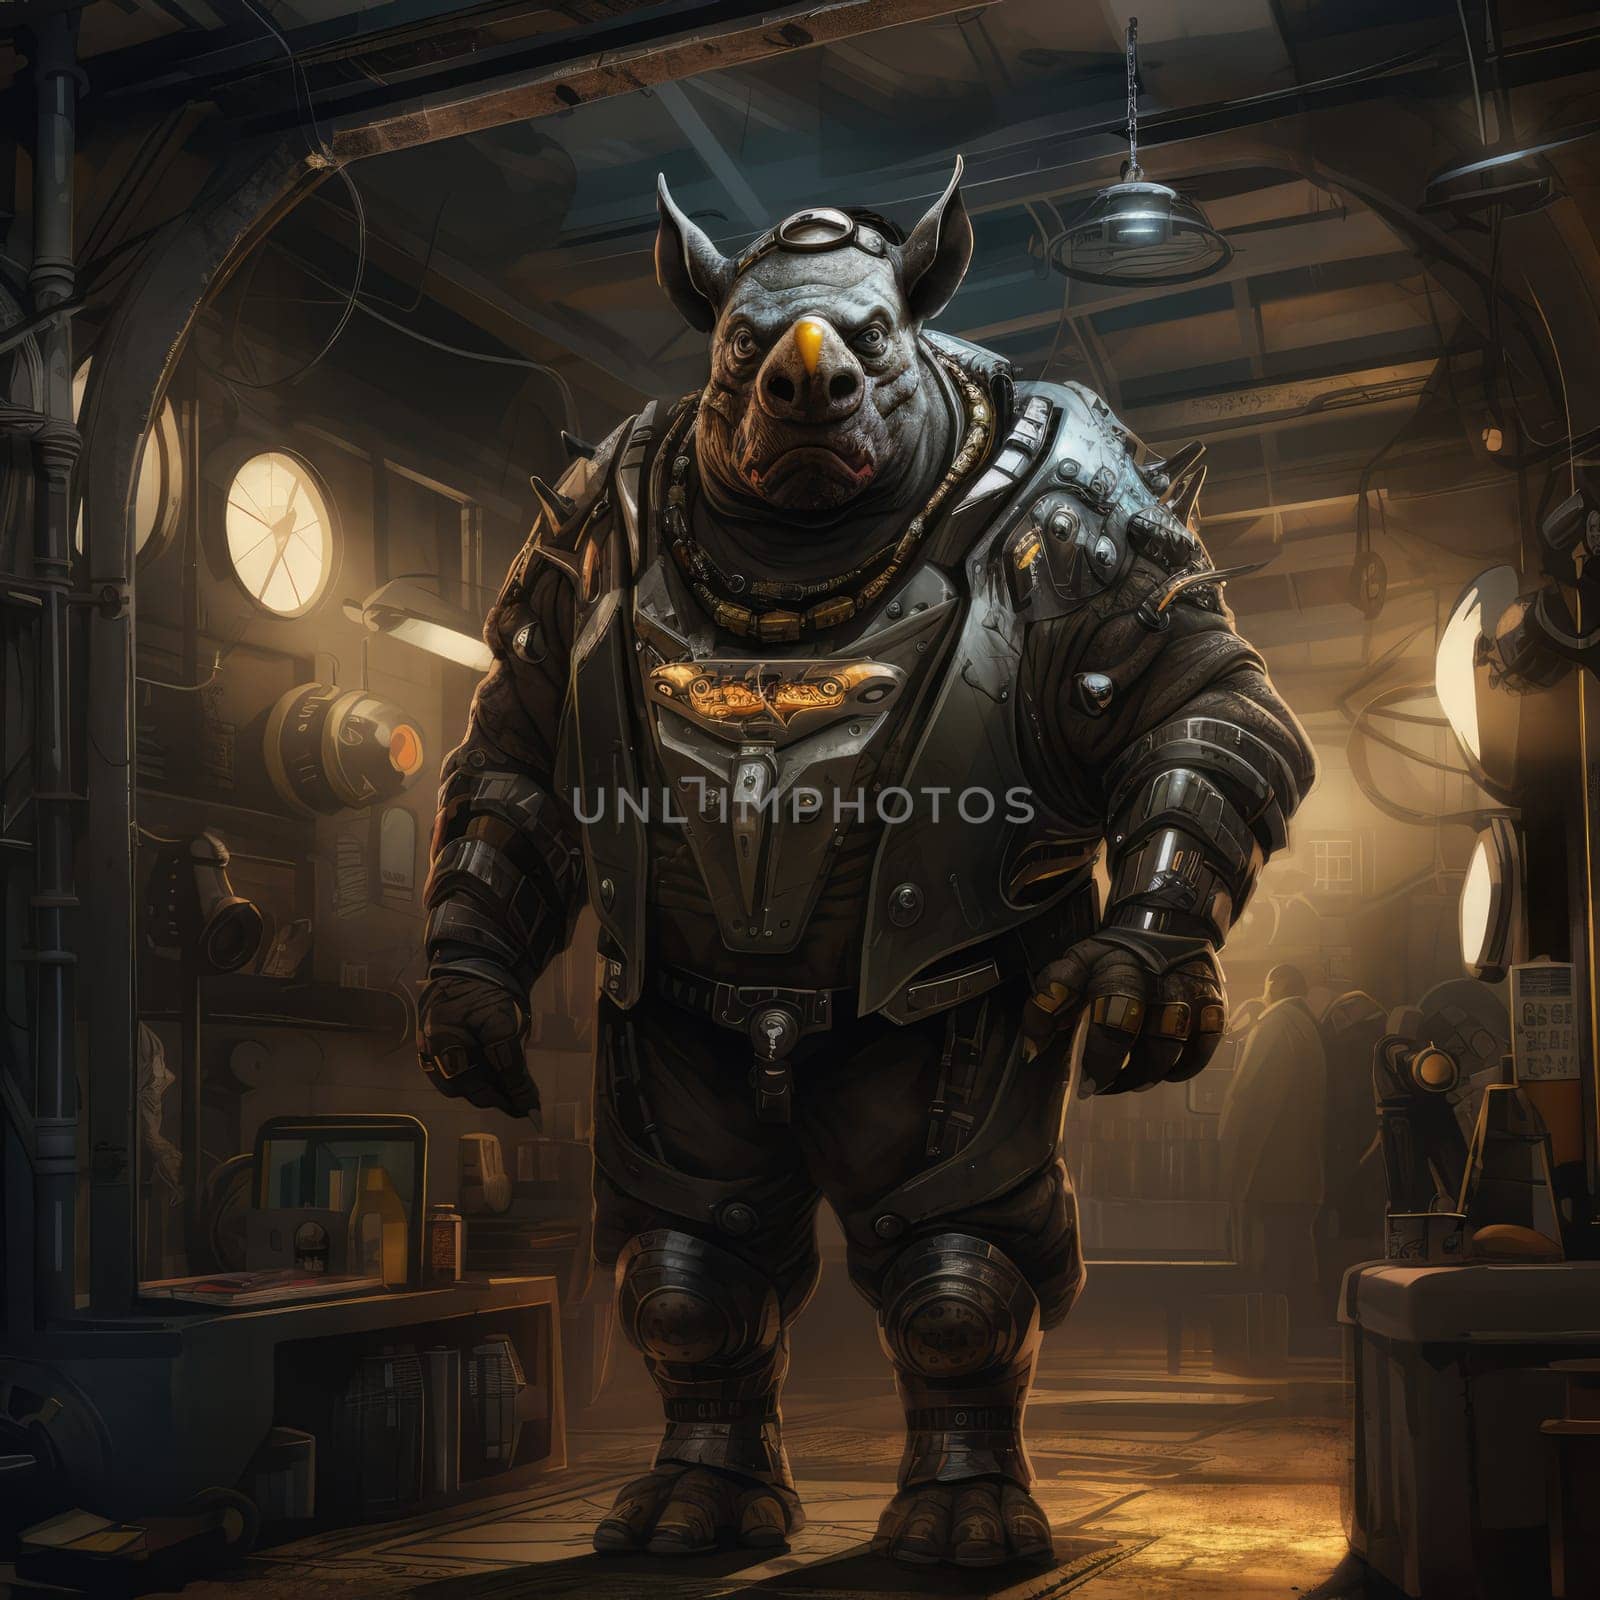 Rhino standing inside a room with industrial equipment, in the style of intricate steampunk